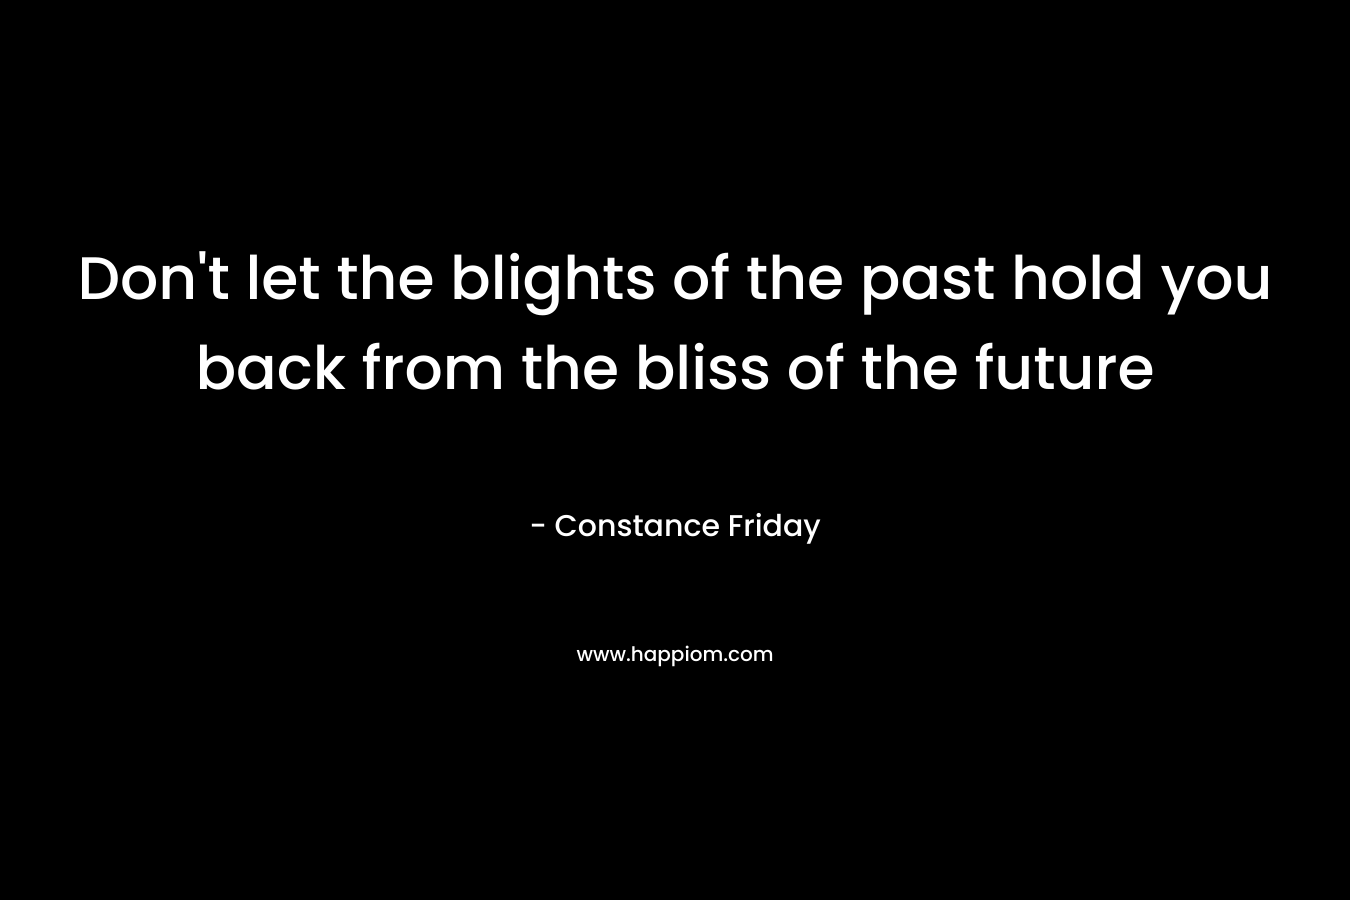 Don’t let the blights of the past hold you back from the bliss of the future – Constance Friday